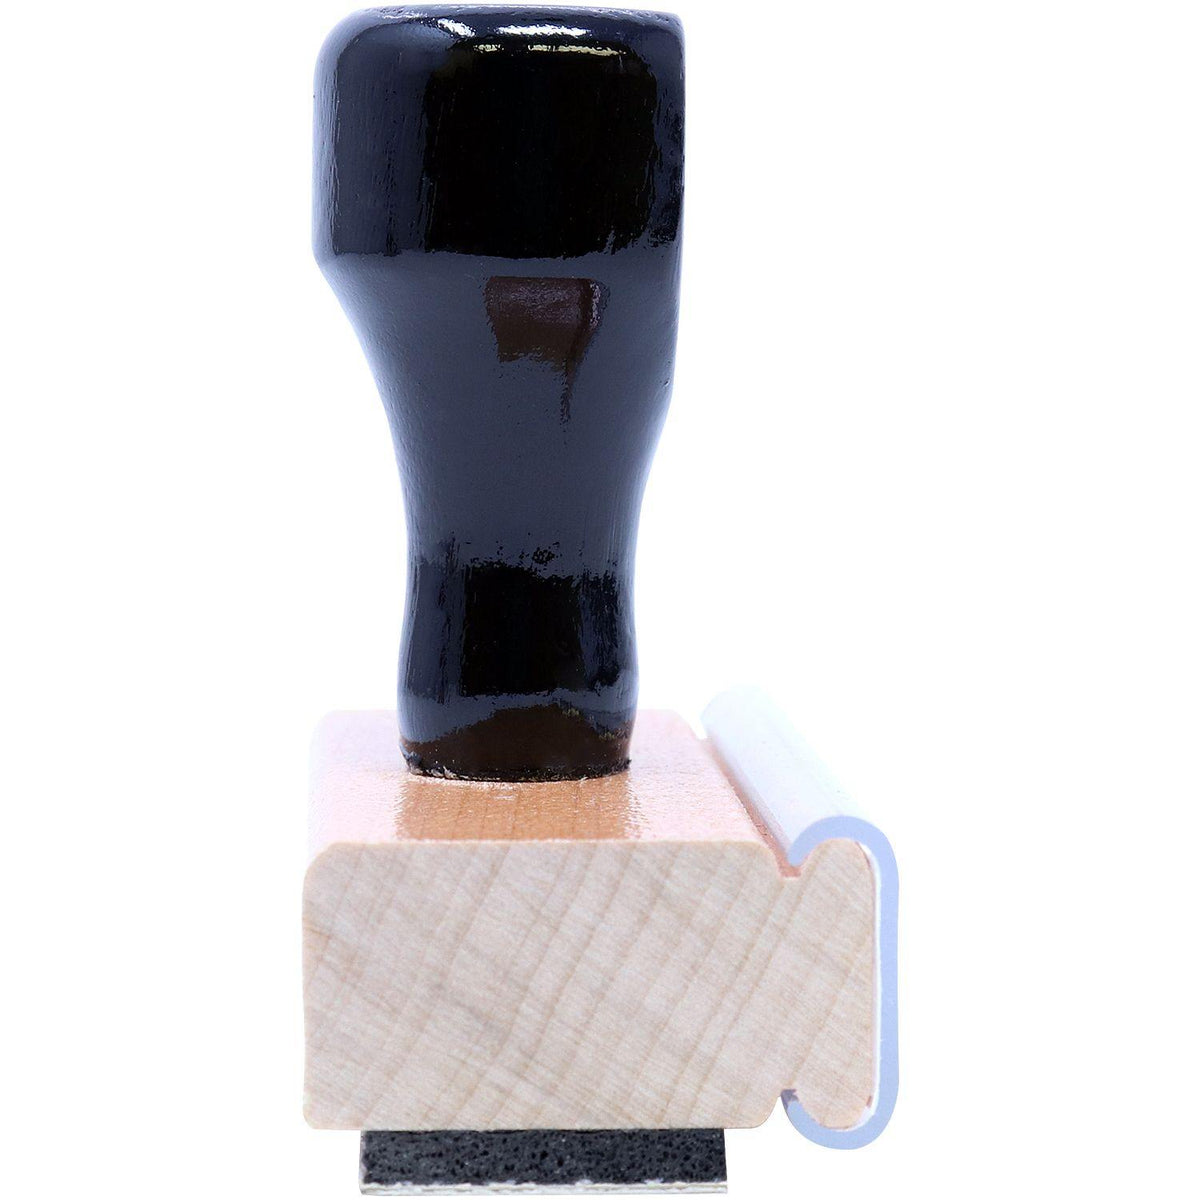 Lower Case First Class Rubber Stamp - Engineer Seal Stamps - Brand_Acorn, Impression Size_Small, Stamp Type_Regular Stamp, Type of Use_General, Type of Use_Office, Type of Use_Postal &amp; Mailing, Type of Use_Professional